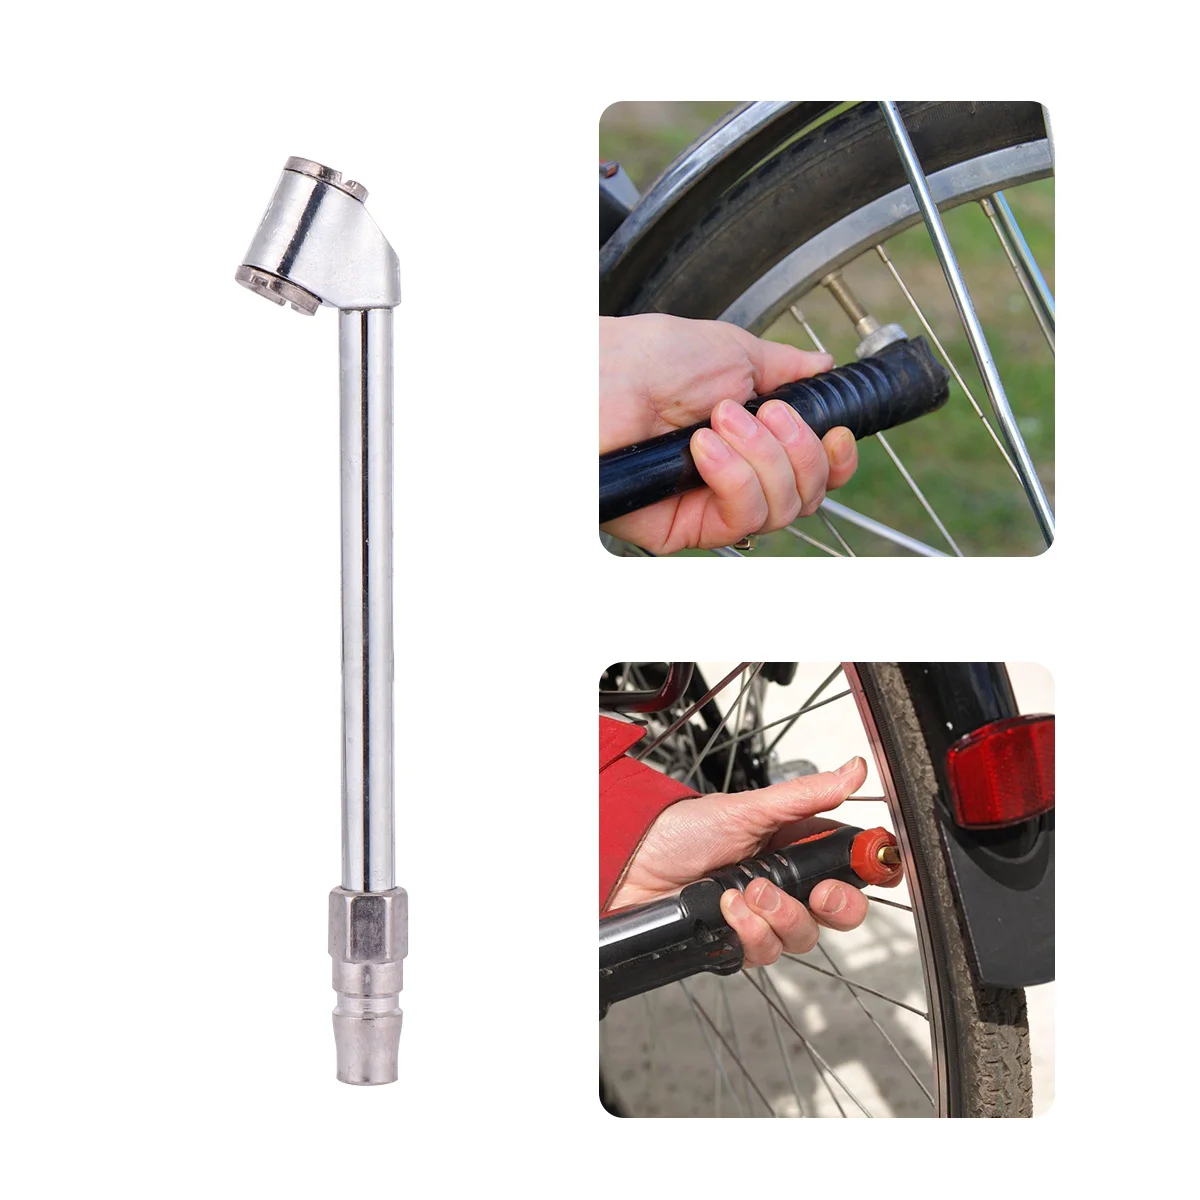 

Accessories Bikes Inflatable Nozzle Head Car Tire Inflator Motorcycle Inflated Valve Inflation Motorbike Tyre For Valves